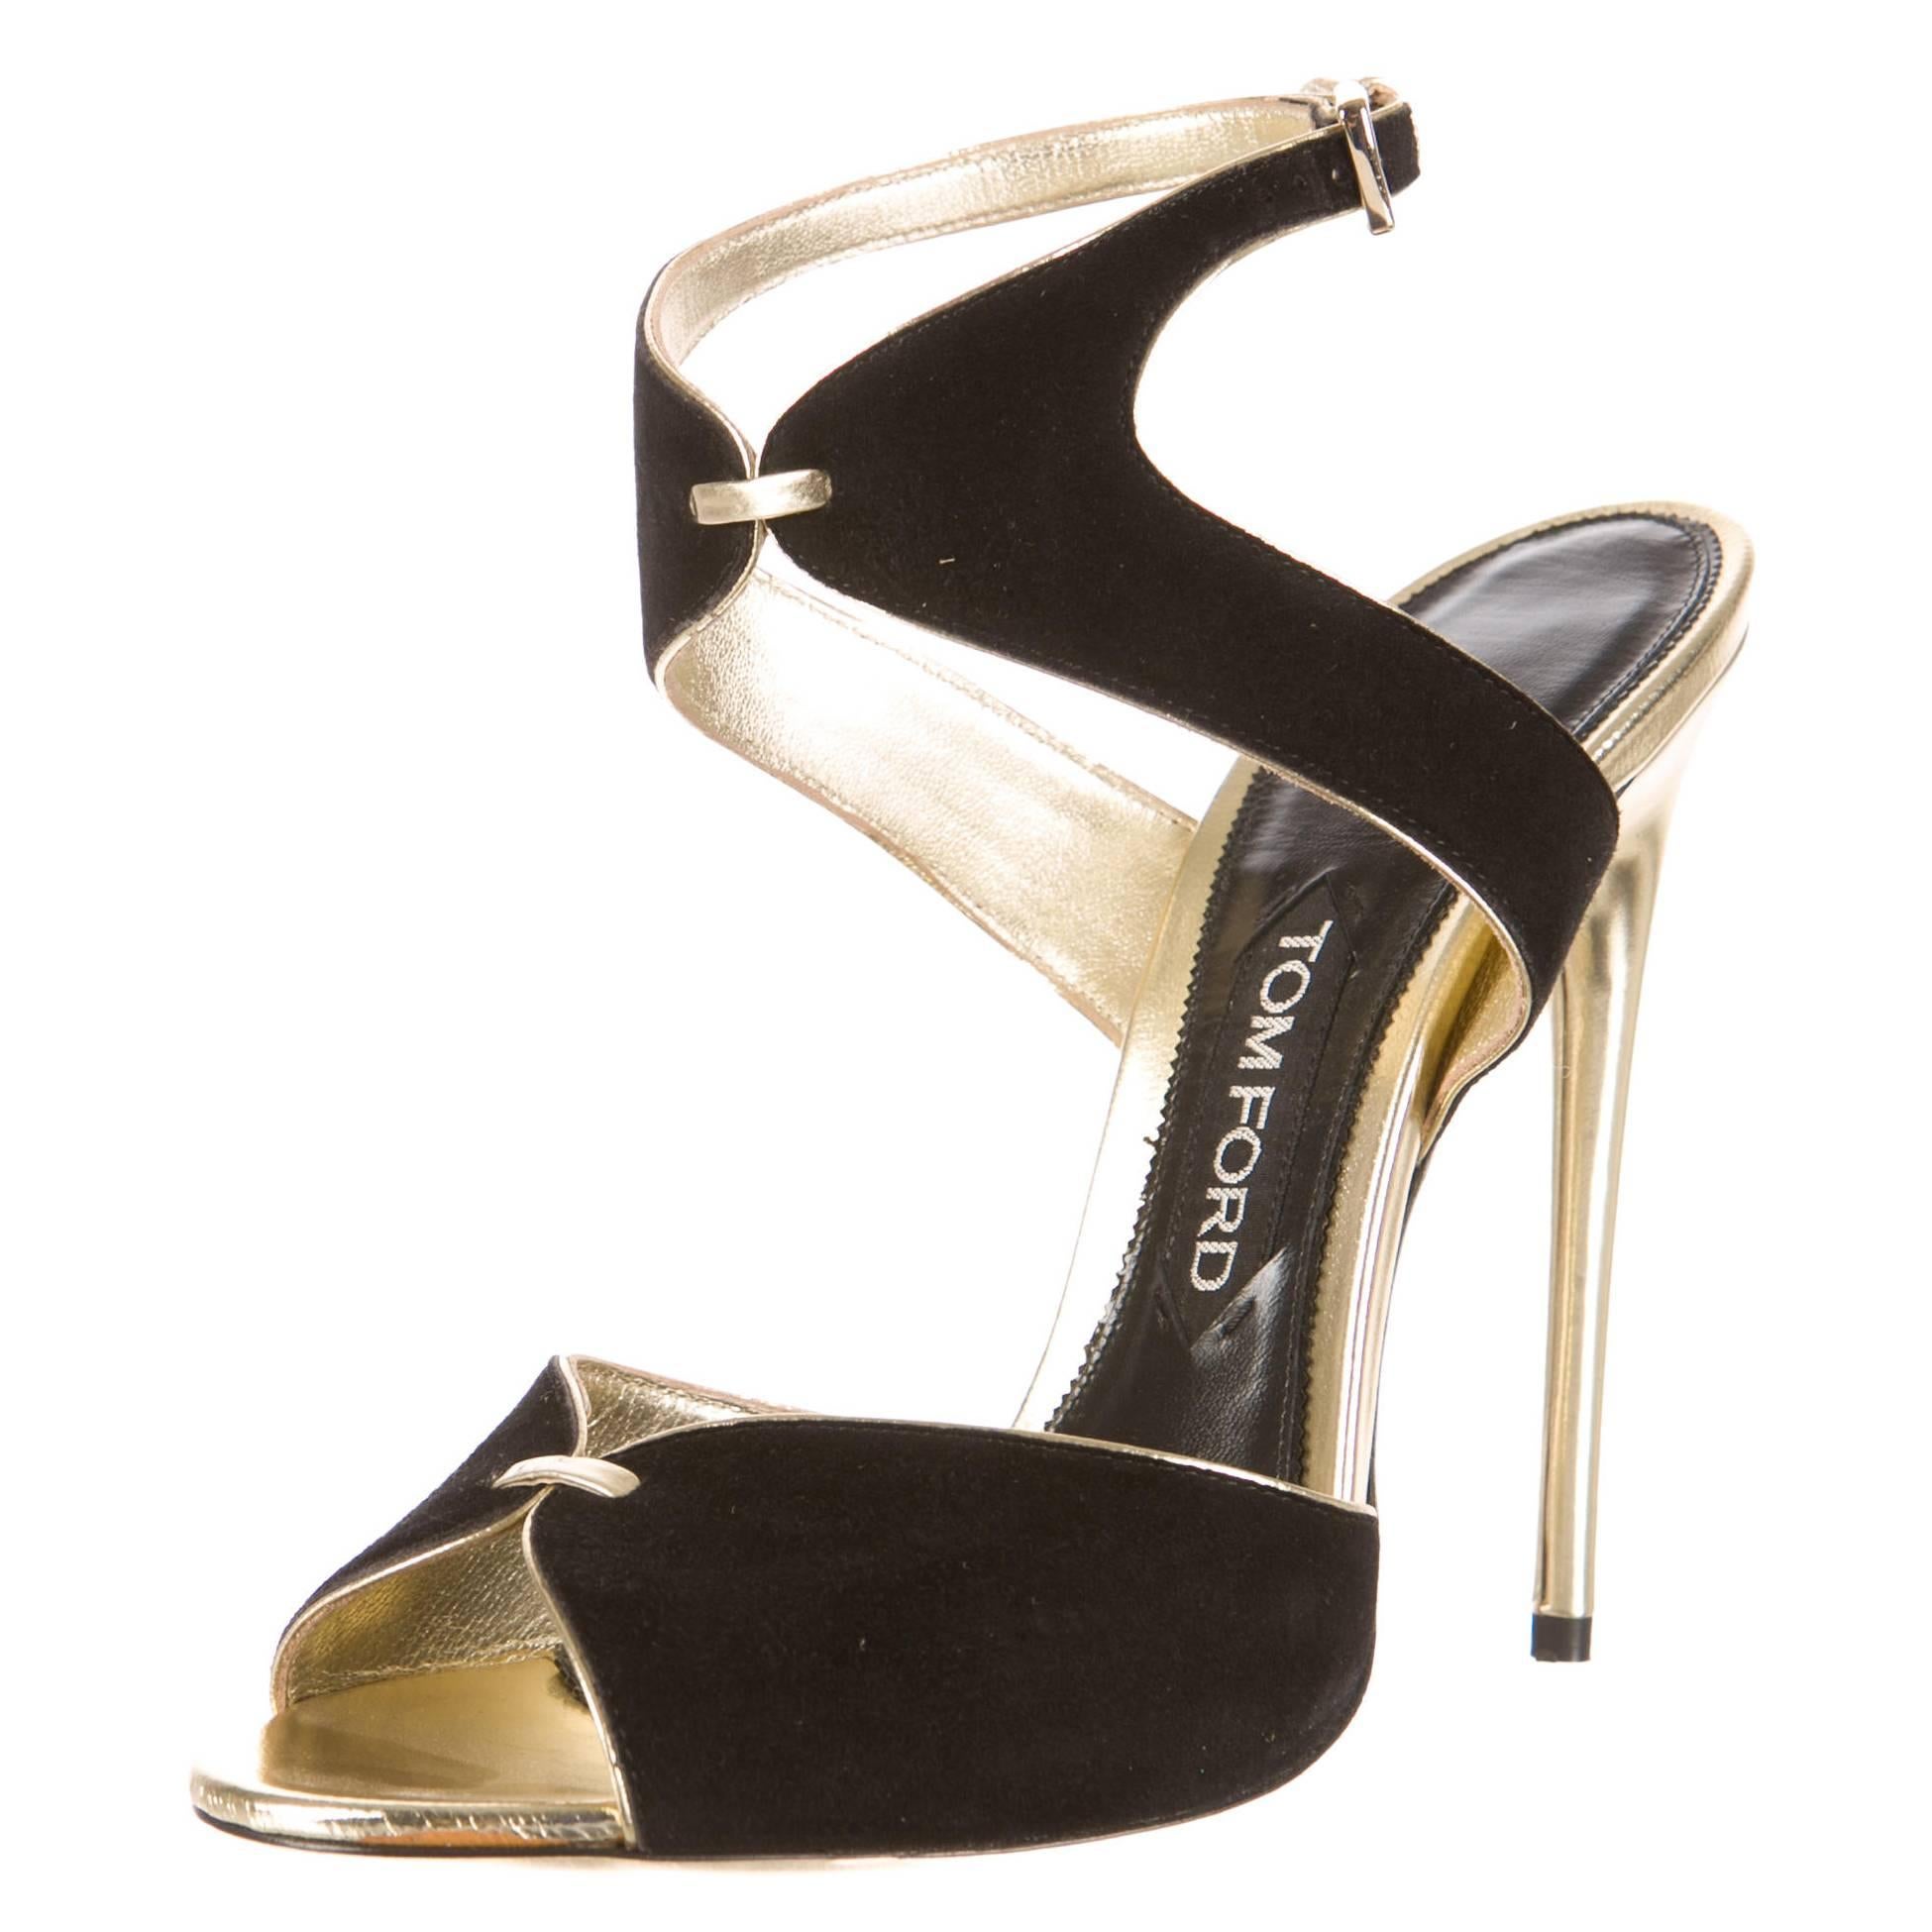 Tom Ford NEW Black Suede Gold Leather Trim High Heels Strappy Stiletto Sandals